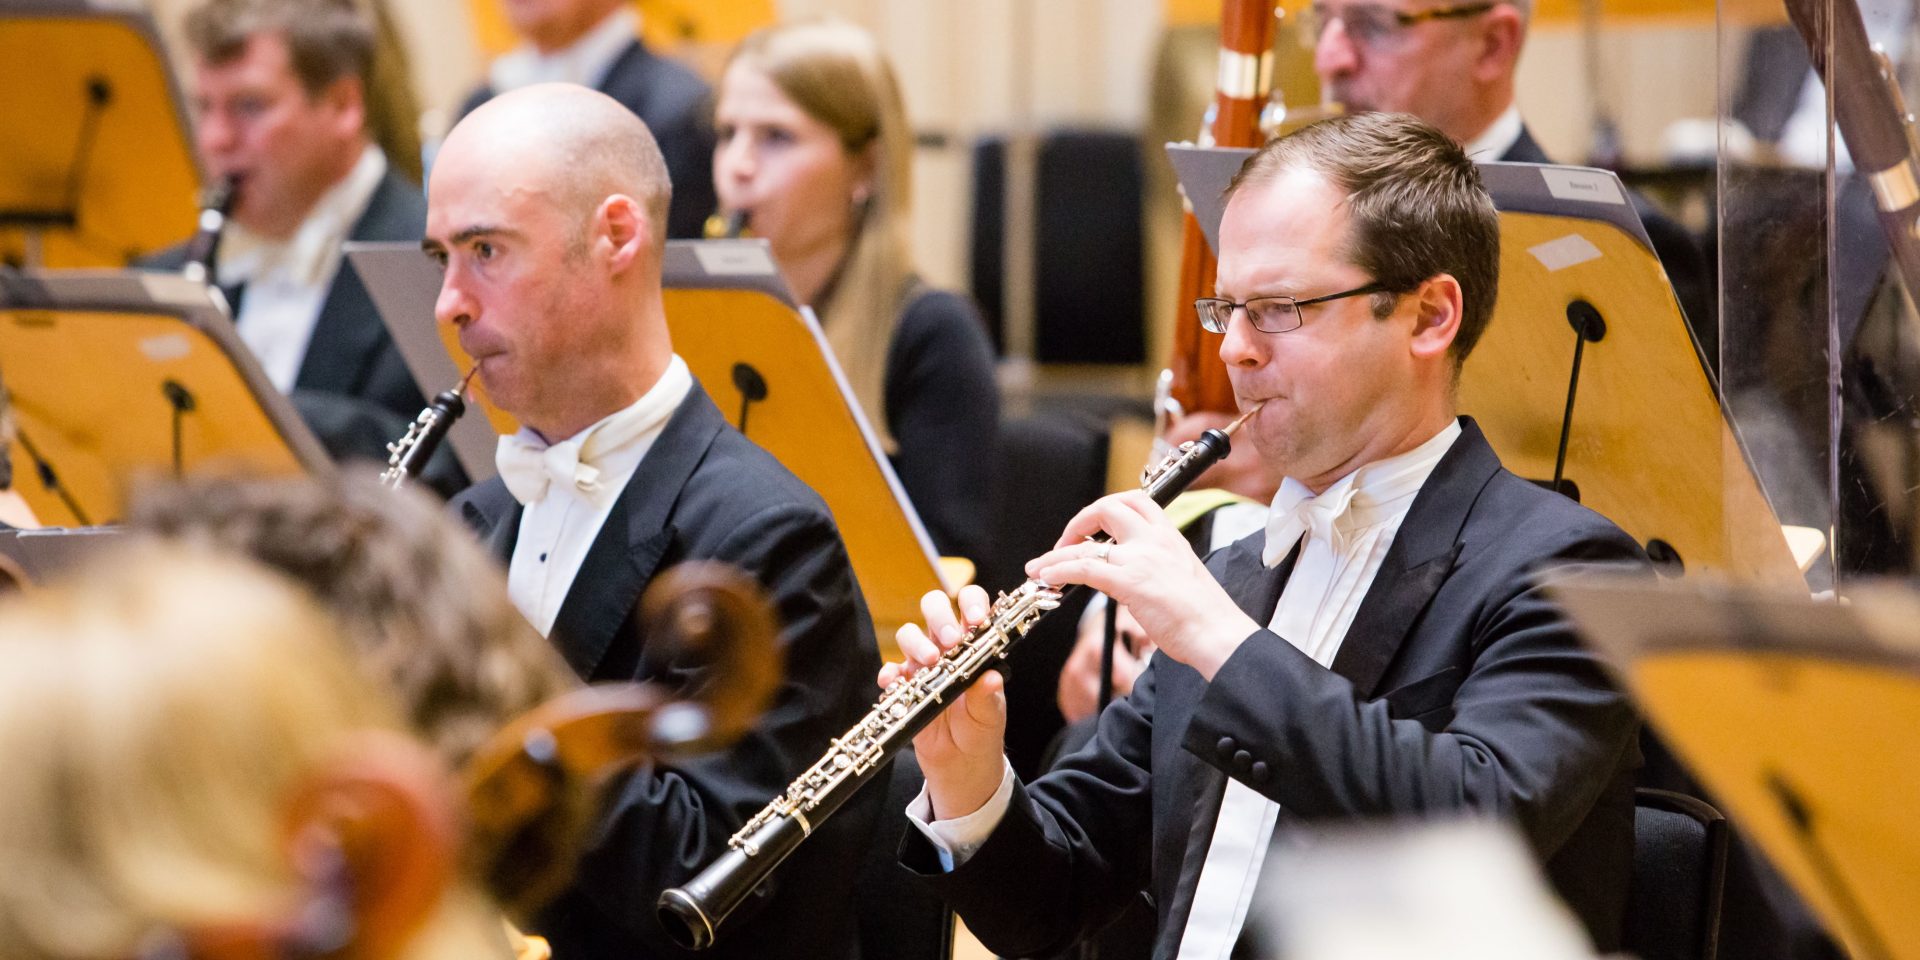 Scotland’s National Orchestra is on tour!